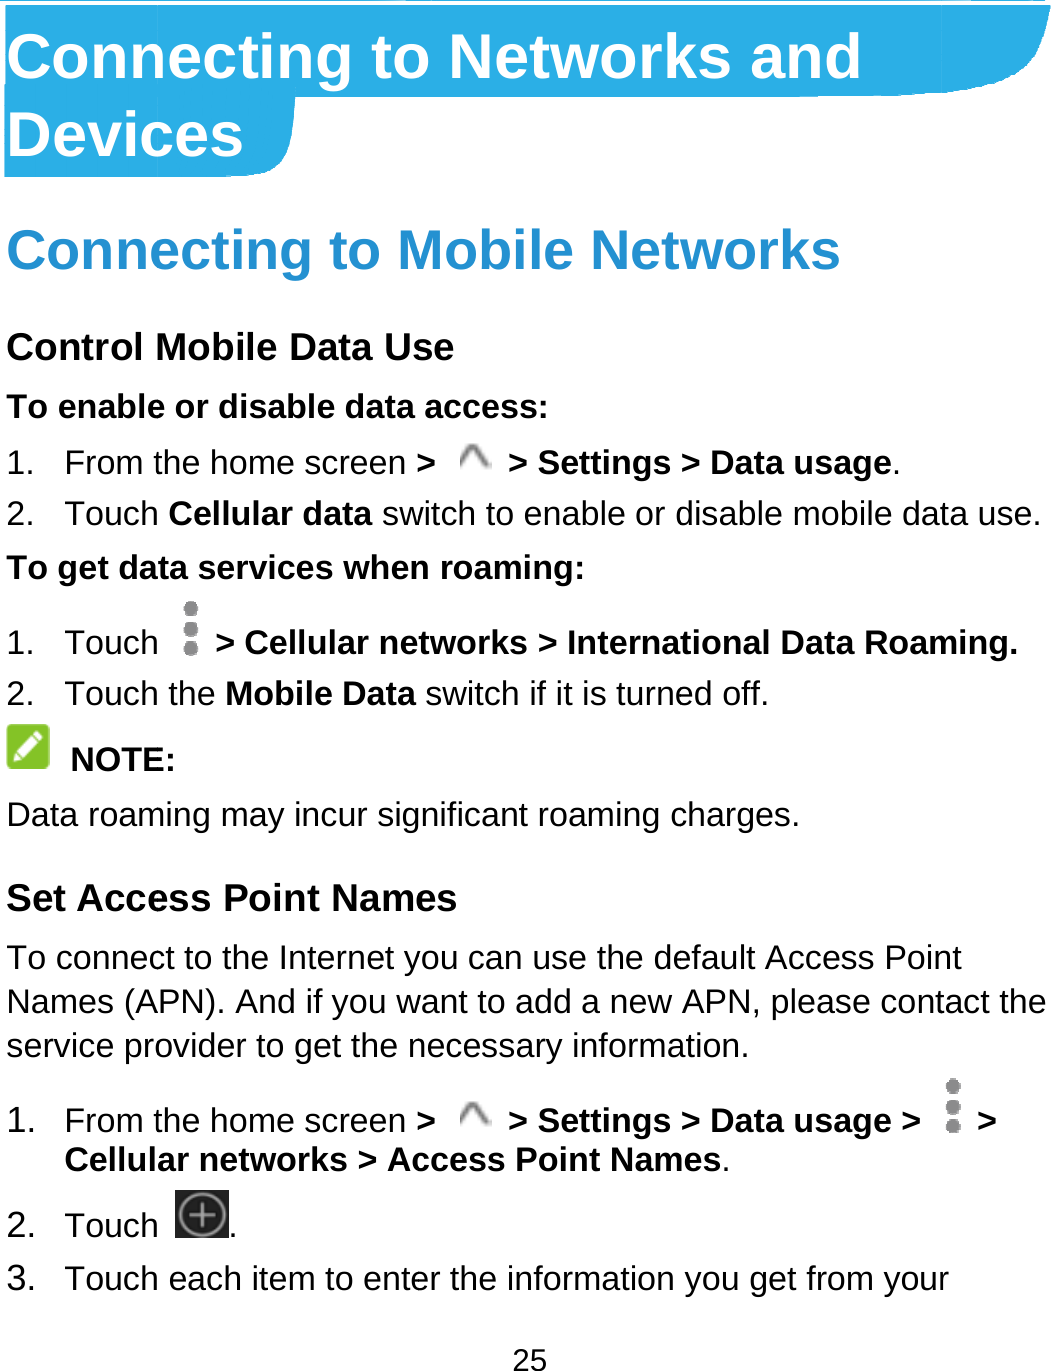  ConnDevicConneControl To enable1. From t2. TouchTo get da1. Touch2. Touch NOTEData roamSet AcceTo connecNames (Aservice pro1. From tCellul2. Touch3. Touchnecting toces ecting to MMobile Data Use or disable data the home screen &gt; Cellular data swta services when  &gt; Cellular ne the Mobile DataE: ming may incur sigess Point Namect to the Internet yAPN). And if you wovider to get the nthe home screen &gt;ar networks &gt; Ac .  each item to ente25 o NetworkMobile Netse access: &gt;  &gt; Settings witch to enable or dn roaming: tworks &gt; Internaswitch if it is turnenificant roaming ces you can use the dewant to add a new necessary informa&gt;  &gt; Settings ccess Point Namer the information ks and works &gt; Data usage. disable mobile dattional Data Roamed off. charges. efault Access PoinAPN, please contation. &gt; Data usage &gt; mes. you get from yourta use. ming.  nt tact the  &gt; r 